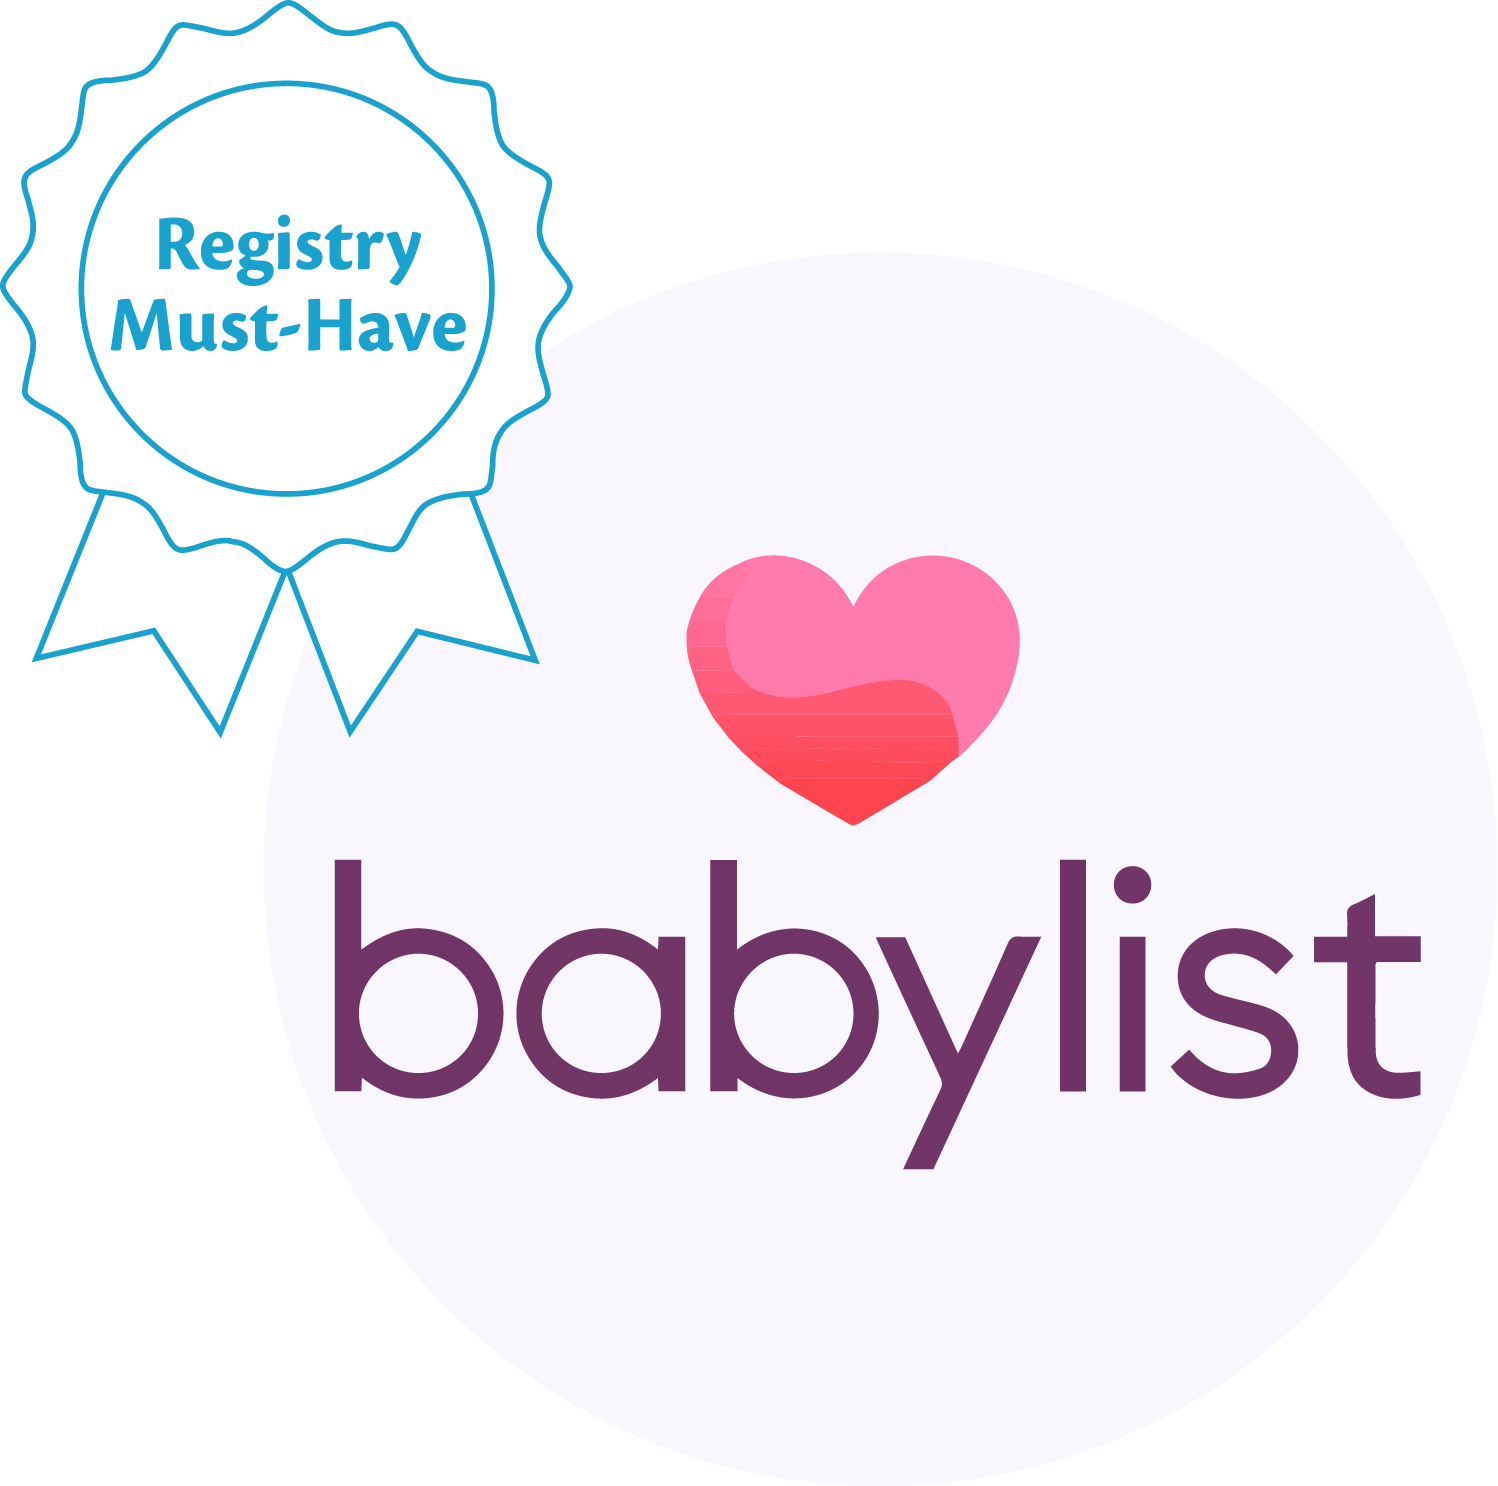 Logo of "babylist" featuring a pink heart above the brand name, with a blue badge on the upper left corner stating "registry must-have.